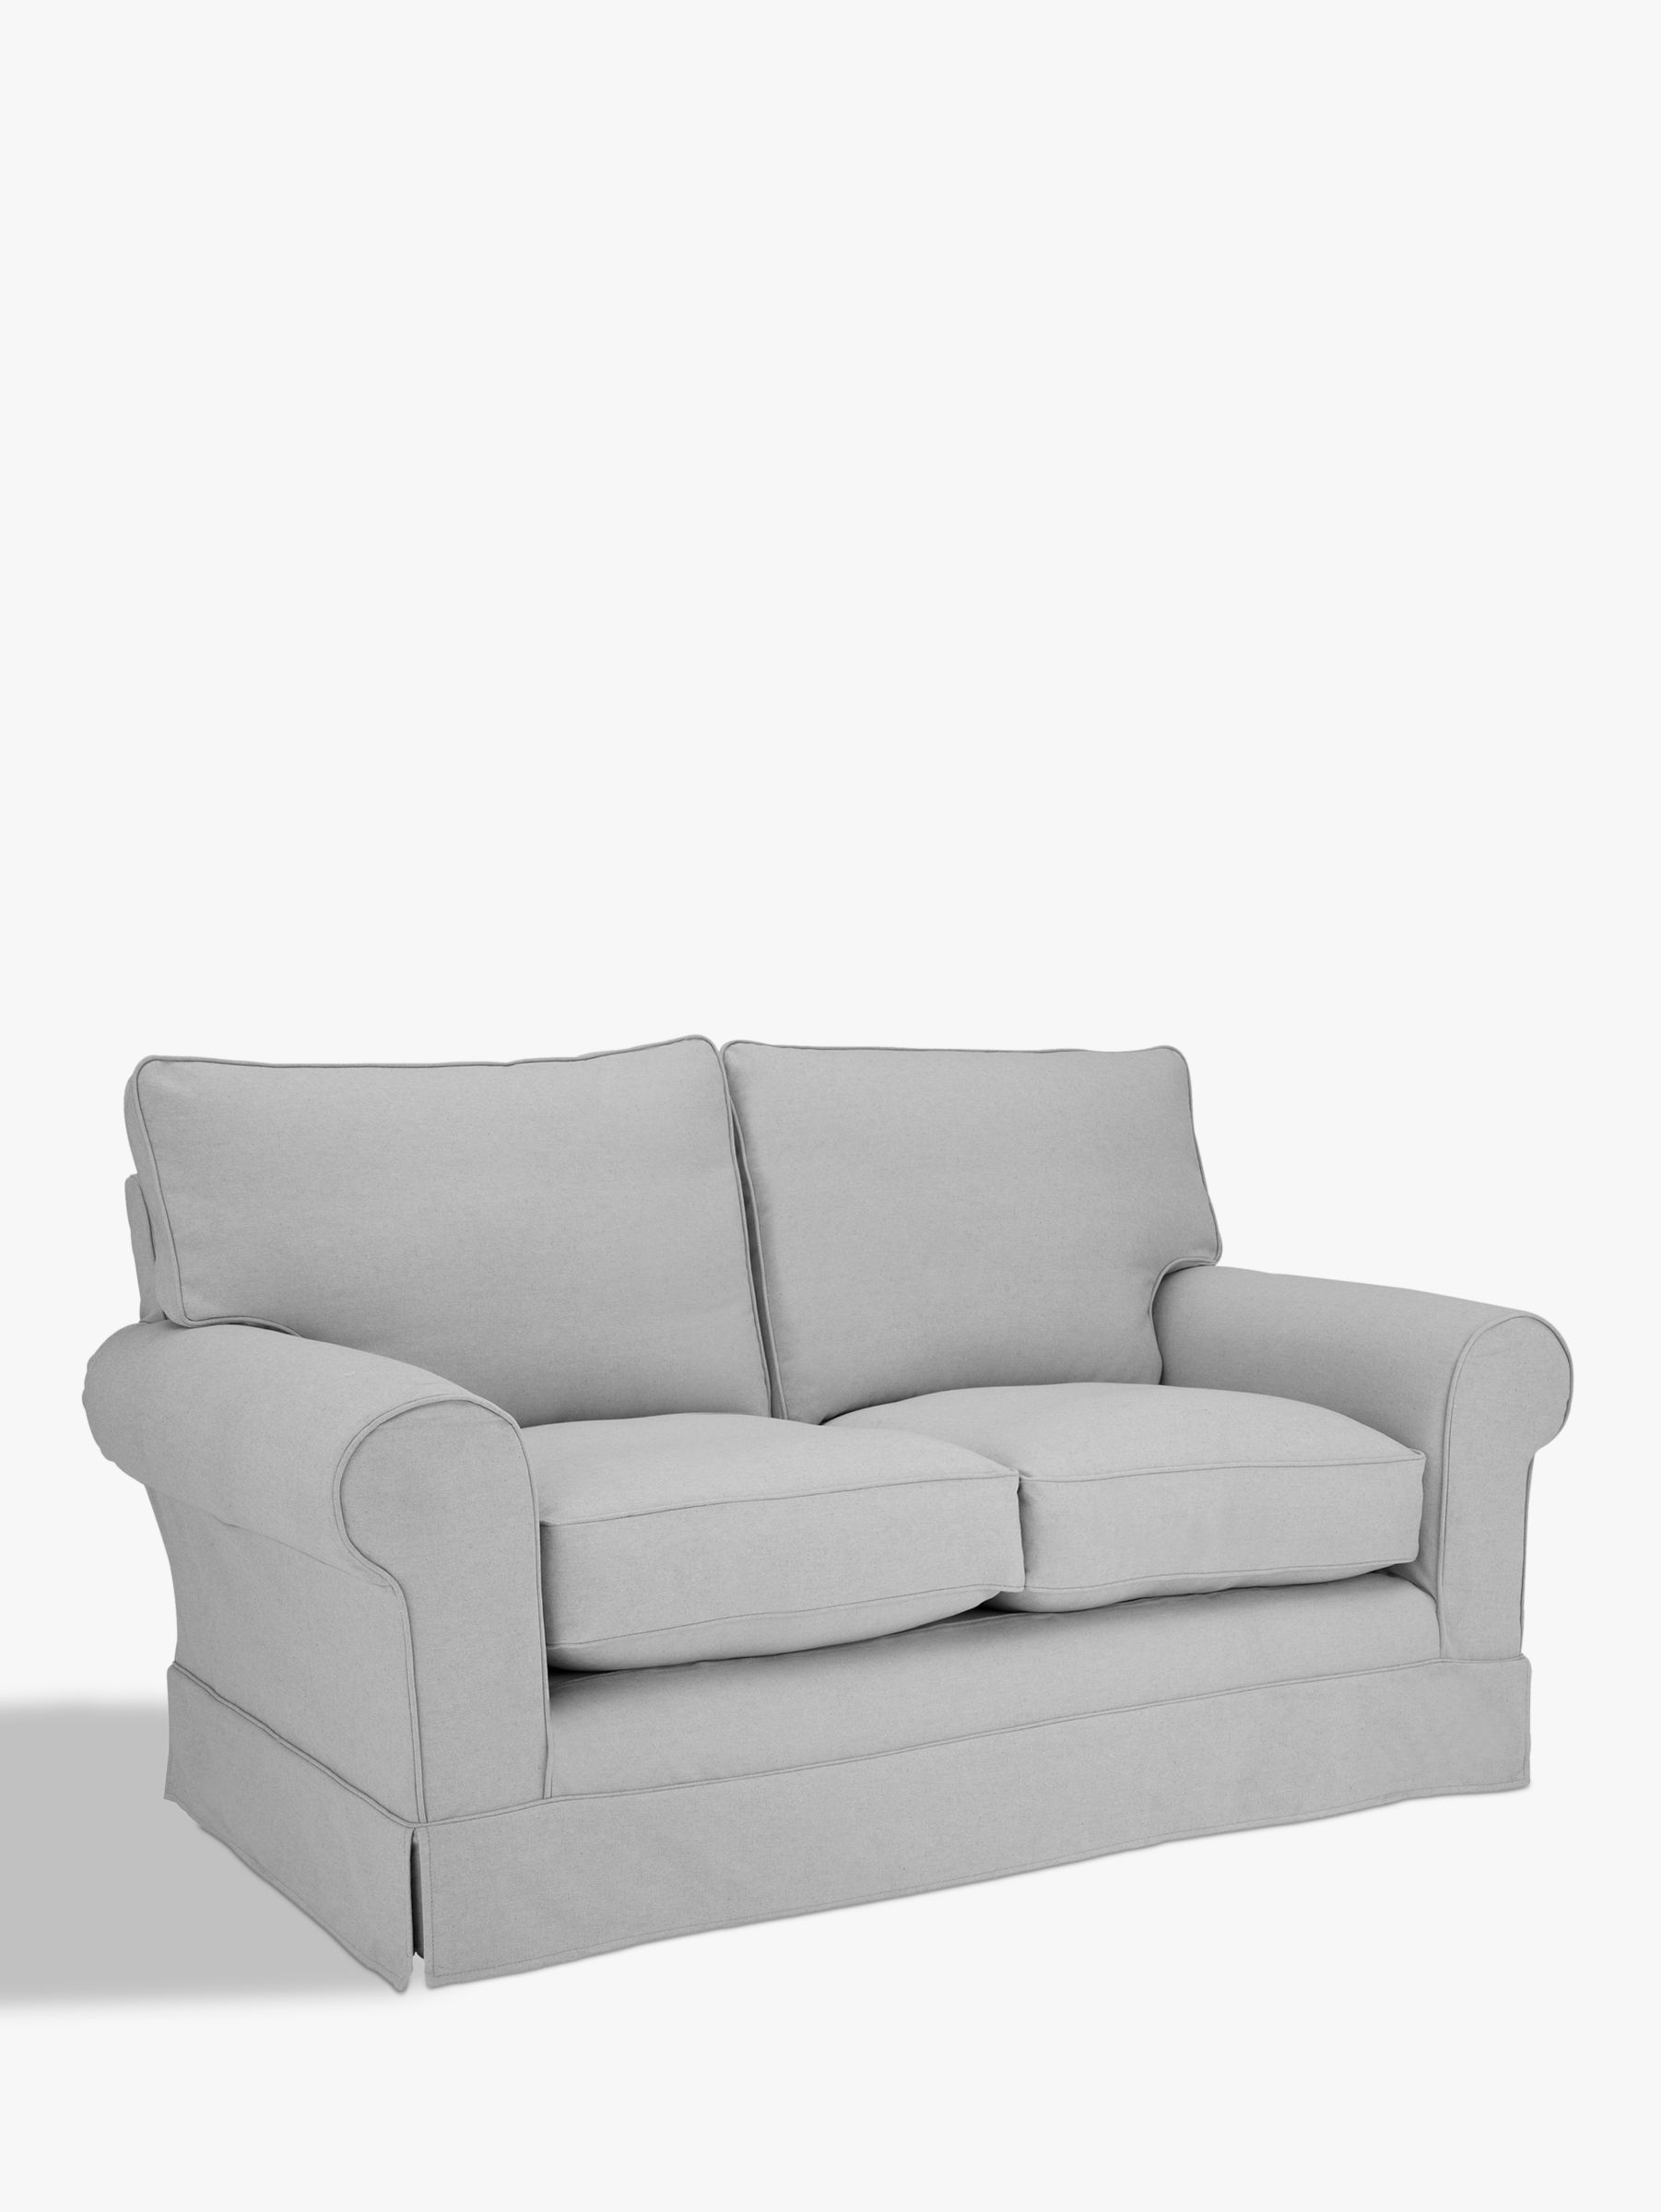 Photo of John lewis padstow small 2 seater sofa